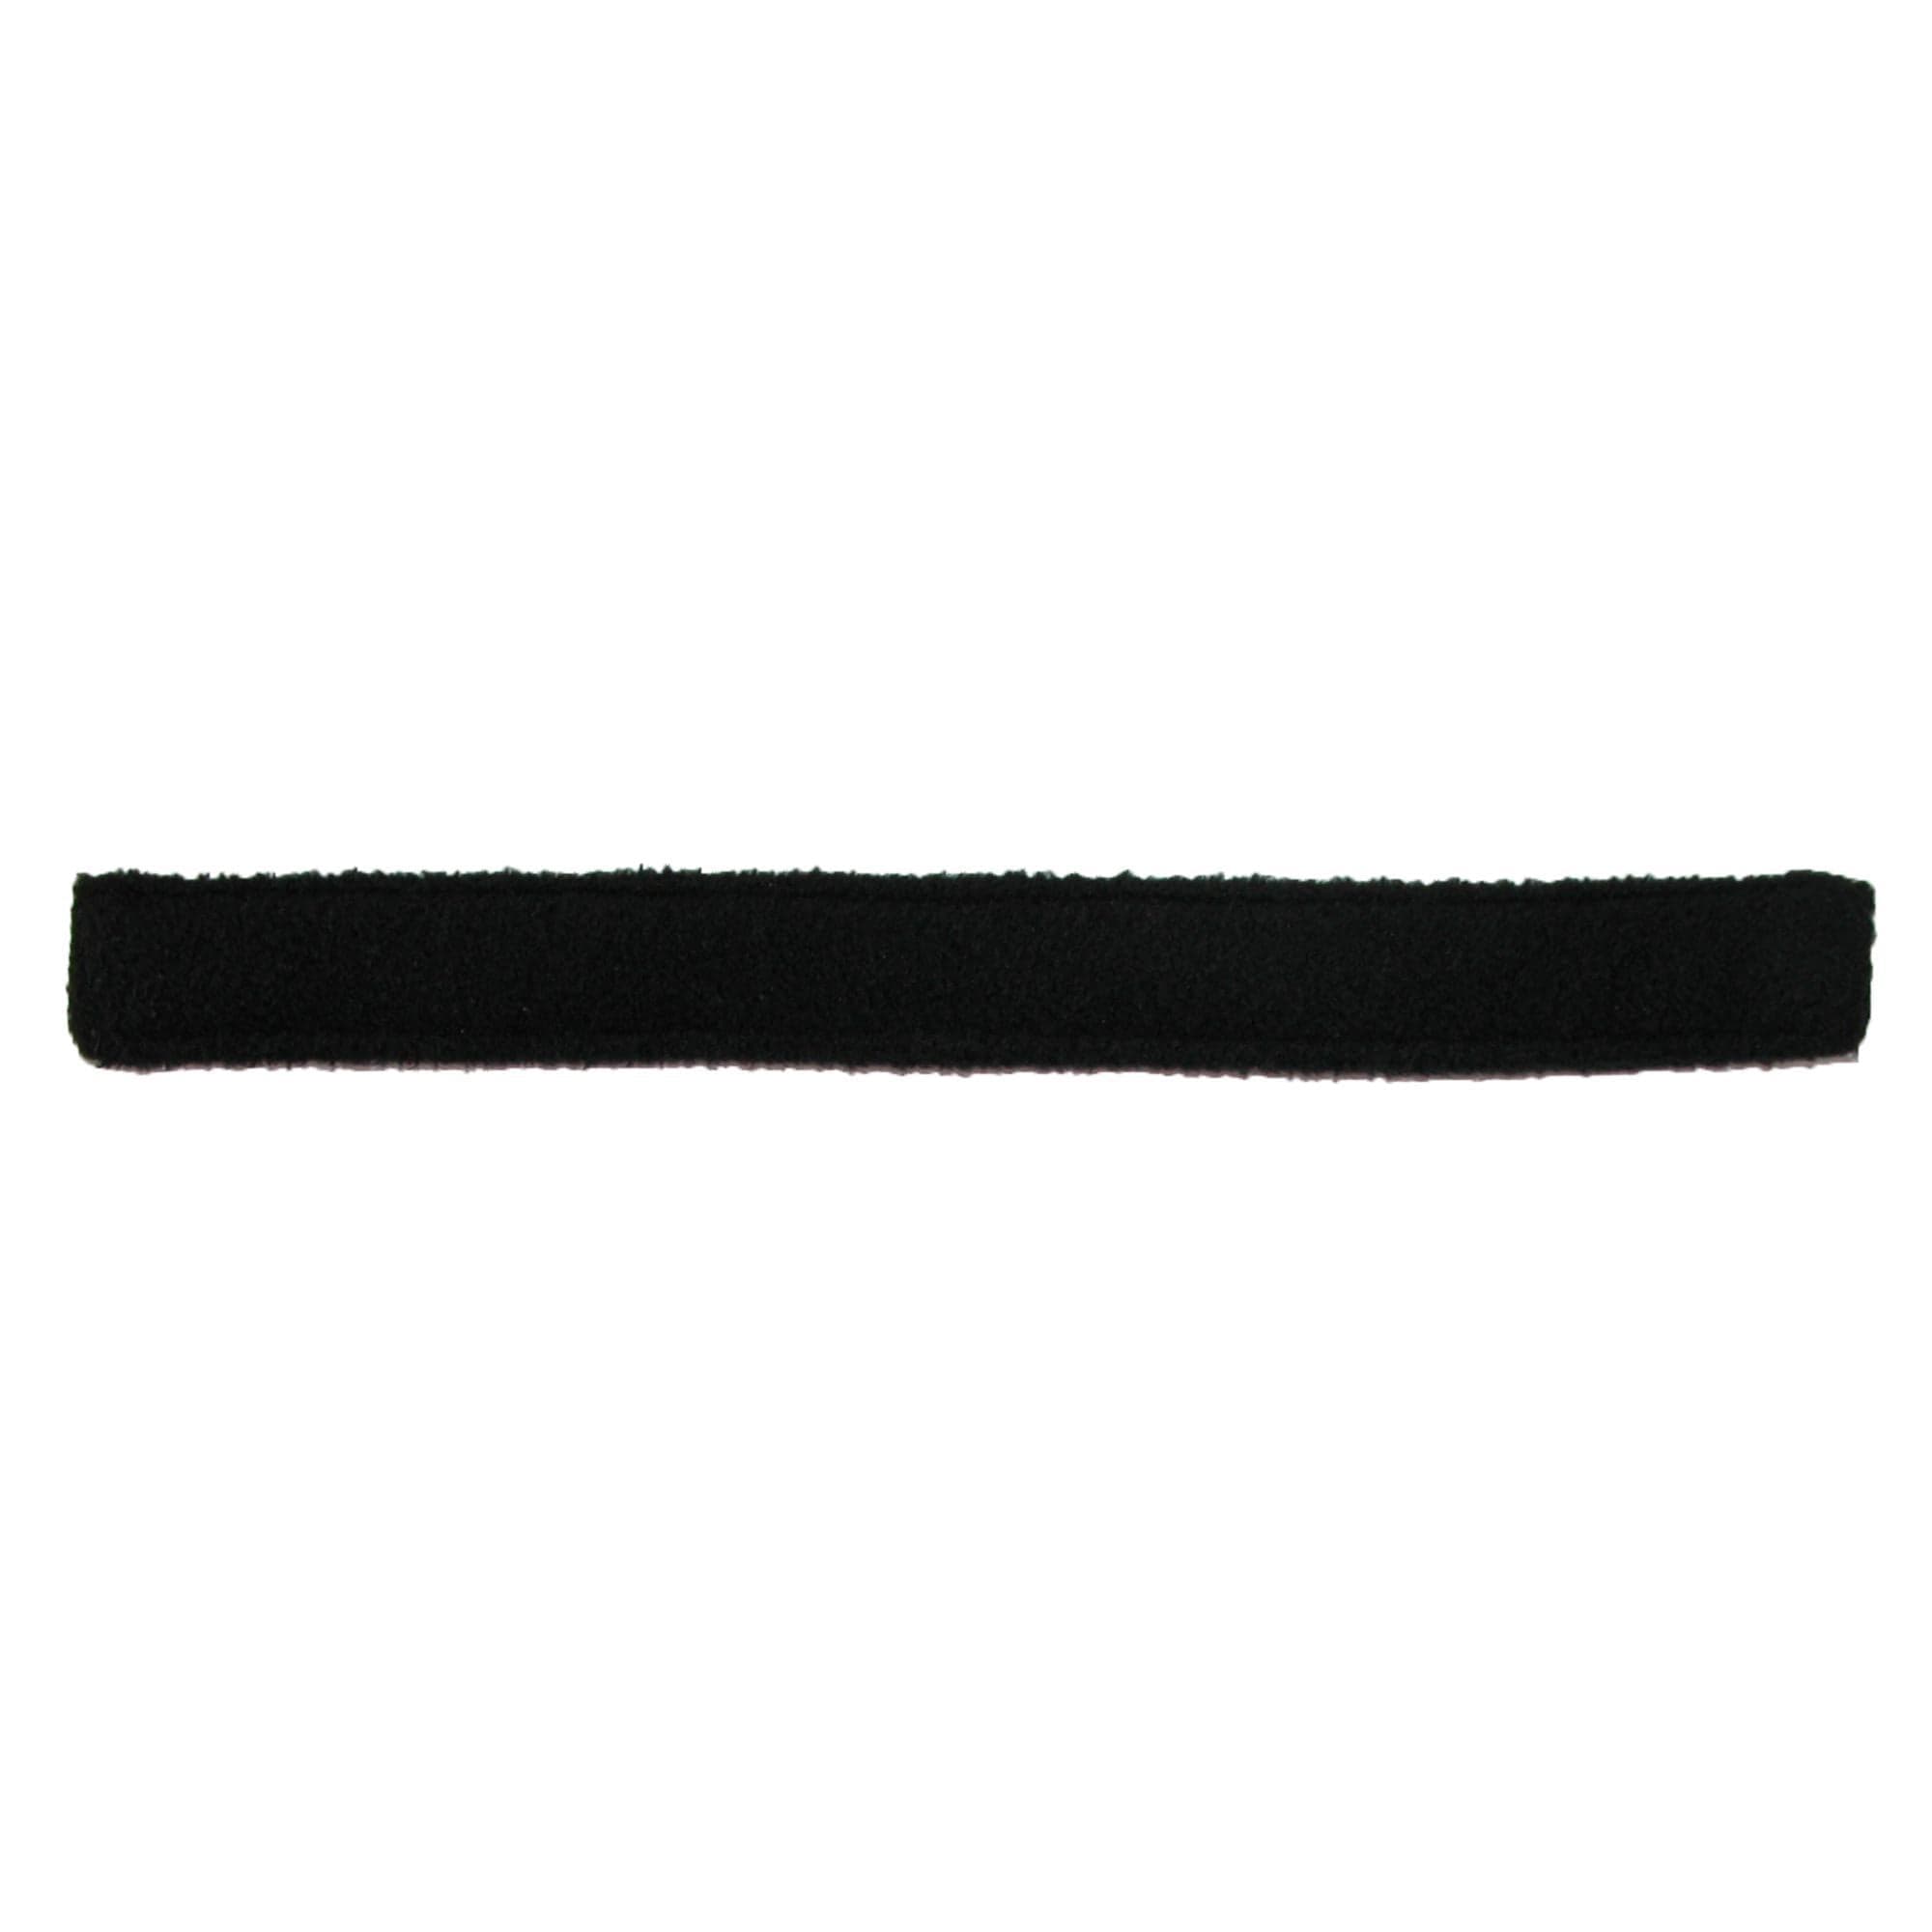 Terry Cotton Disposable Hat Size Reducer and Sweatband by Ascentix